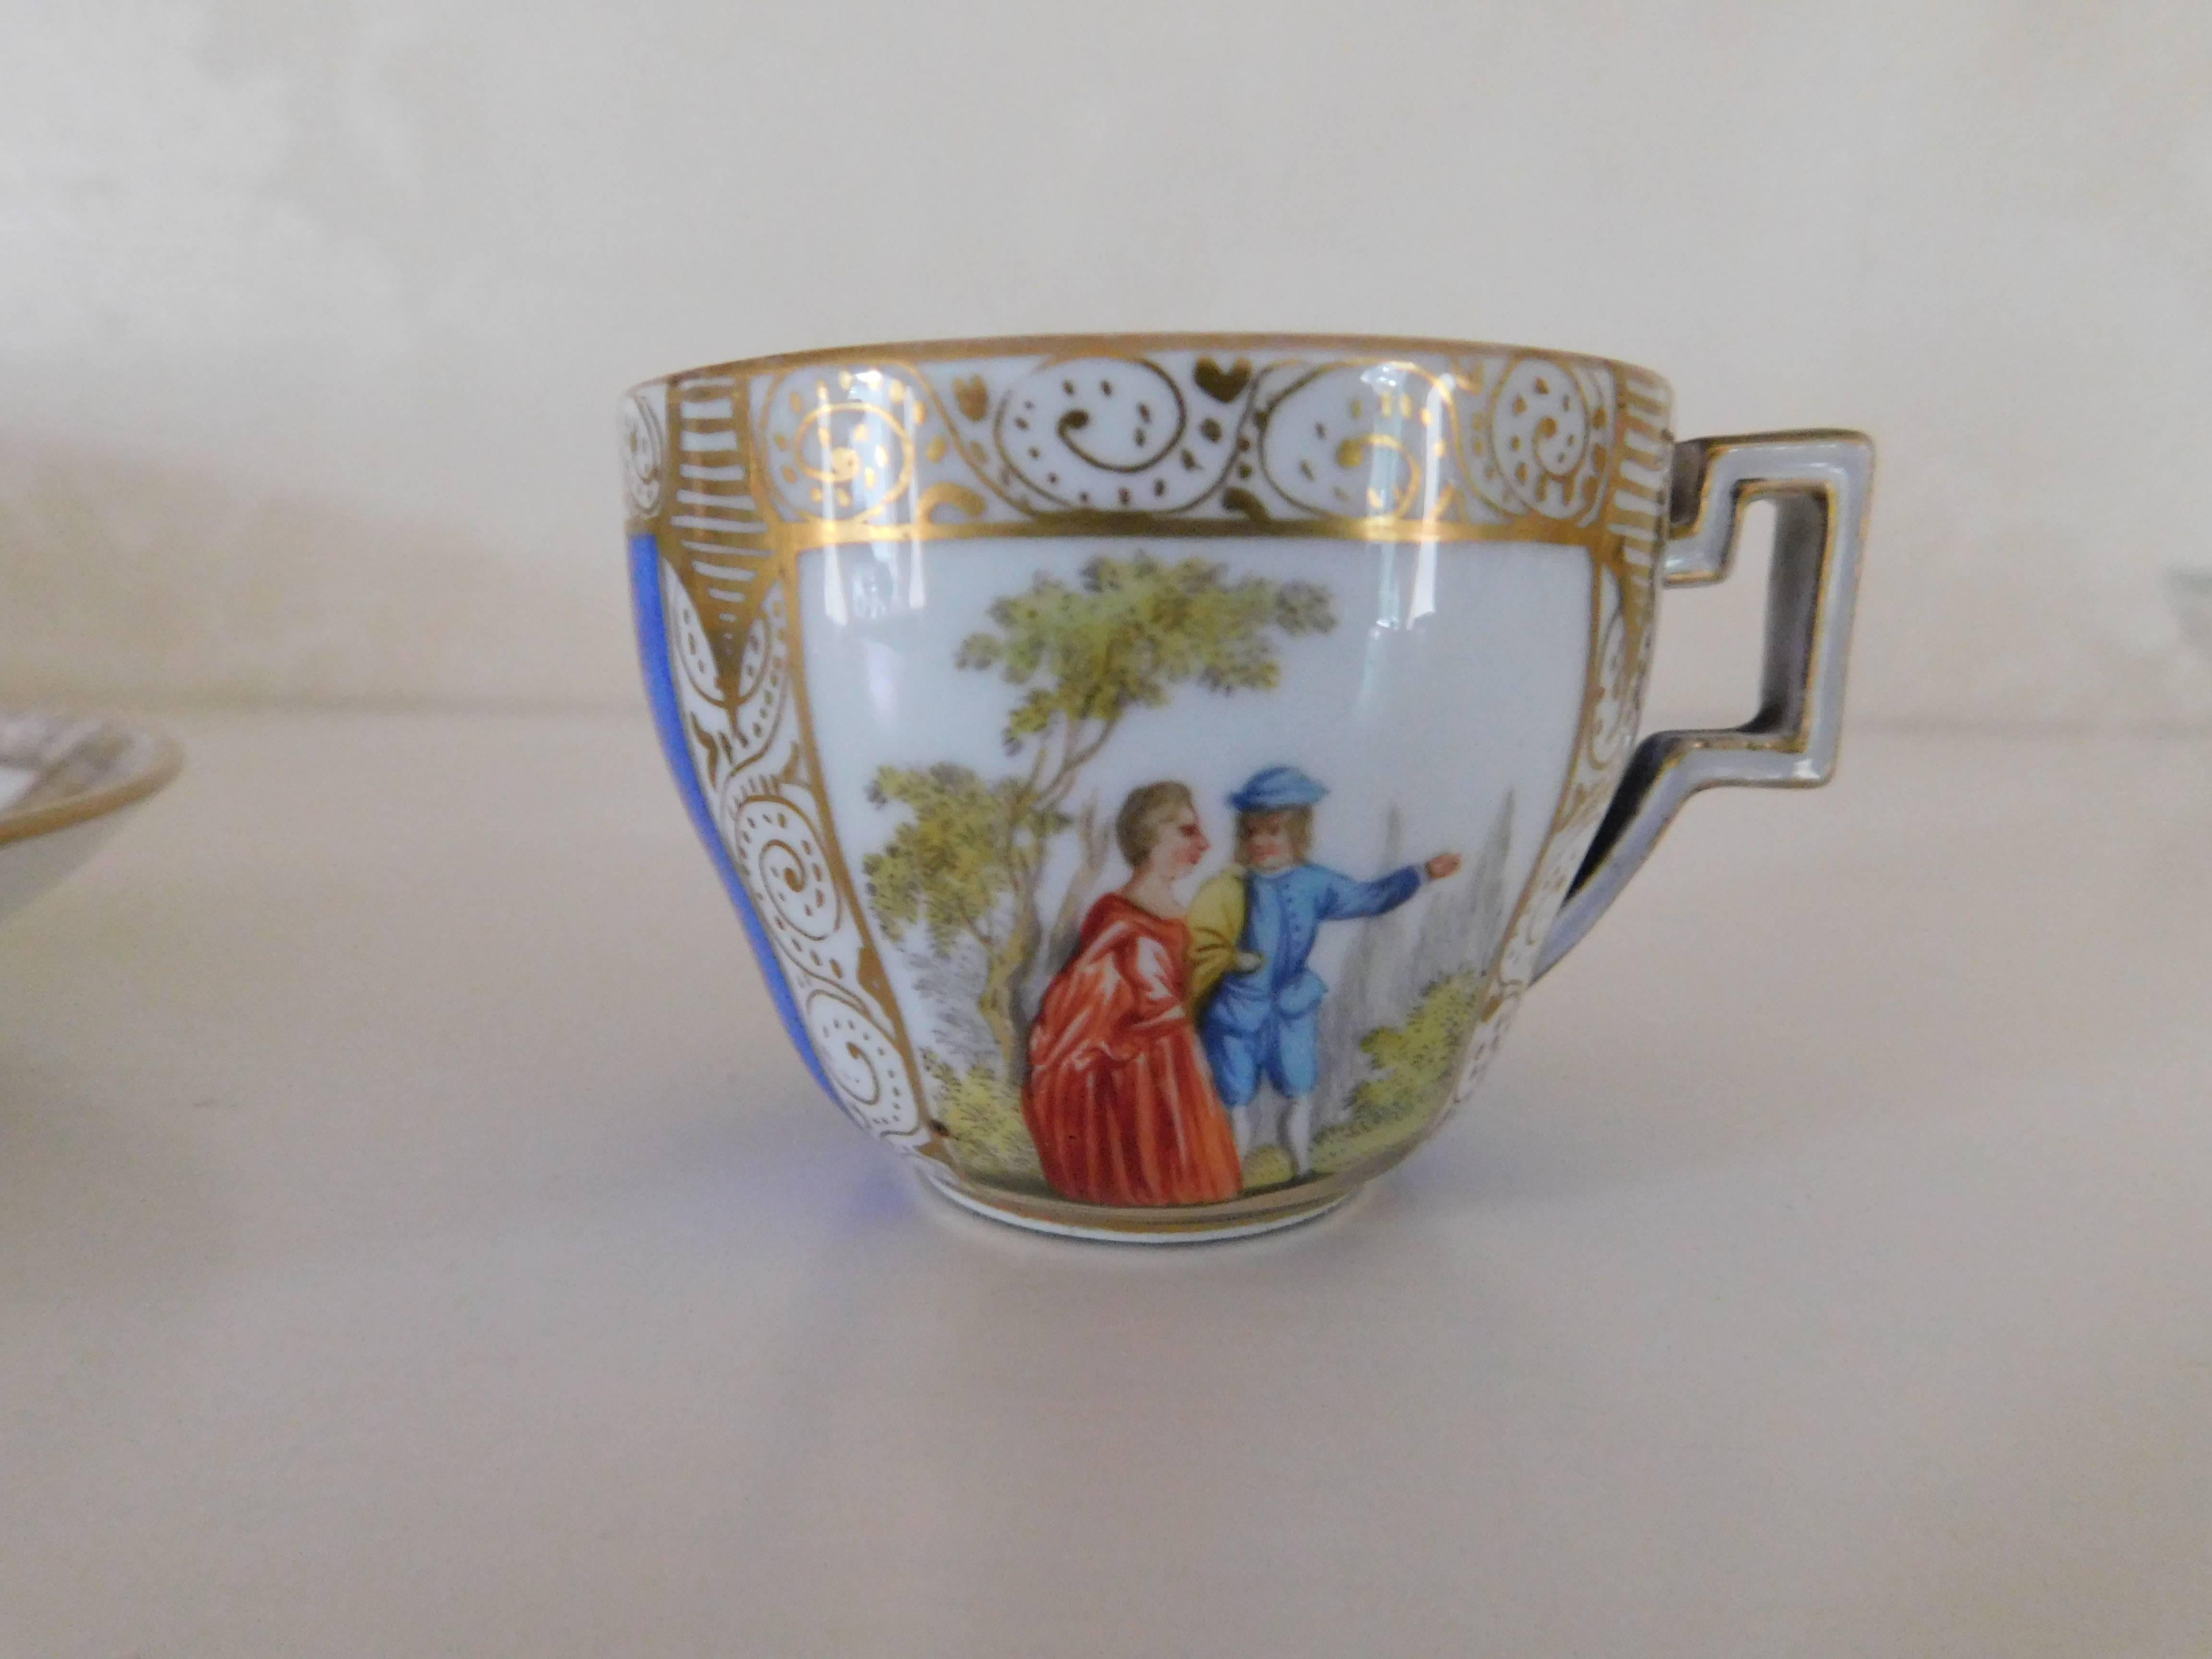 19th century Meissen porcelain cup and saucer 
Hand-painted with scene of man & woman. Blue with gold trim.
Measures: Cup 2.13 In. D x 1.75 In. H
Saucer 4.25 In. D x .75 In. H

Meissen porcelain or Meissen china is the first European hard-paste